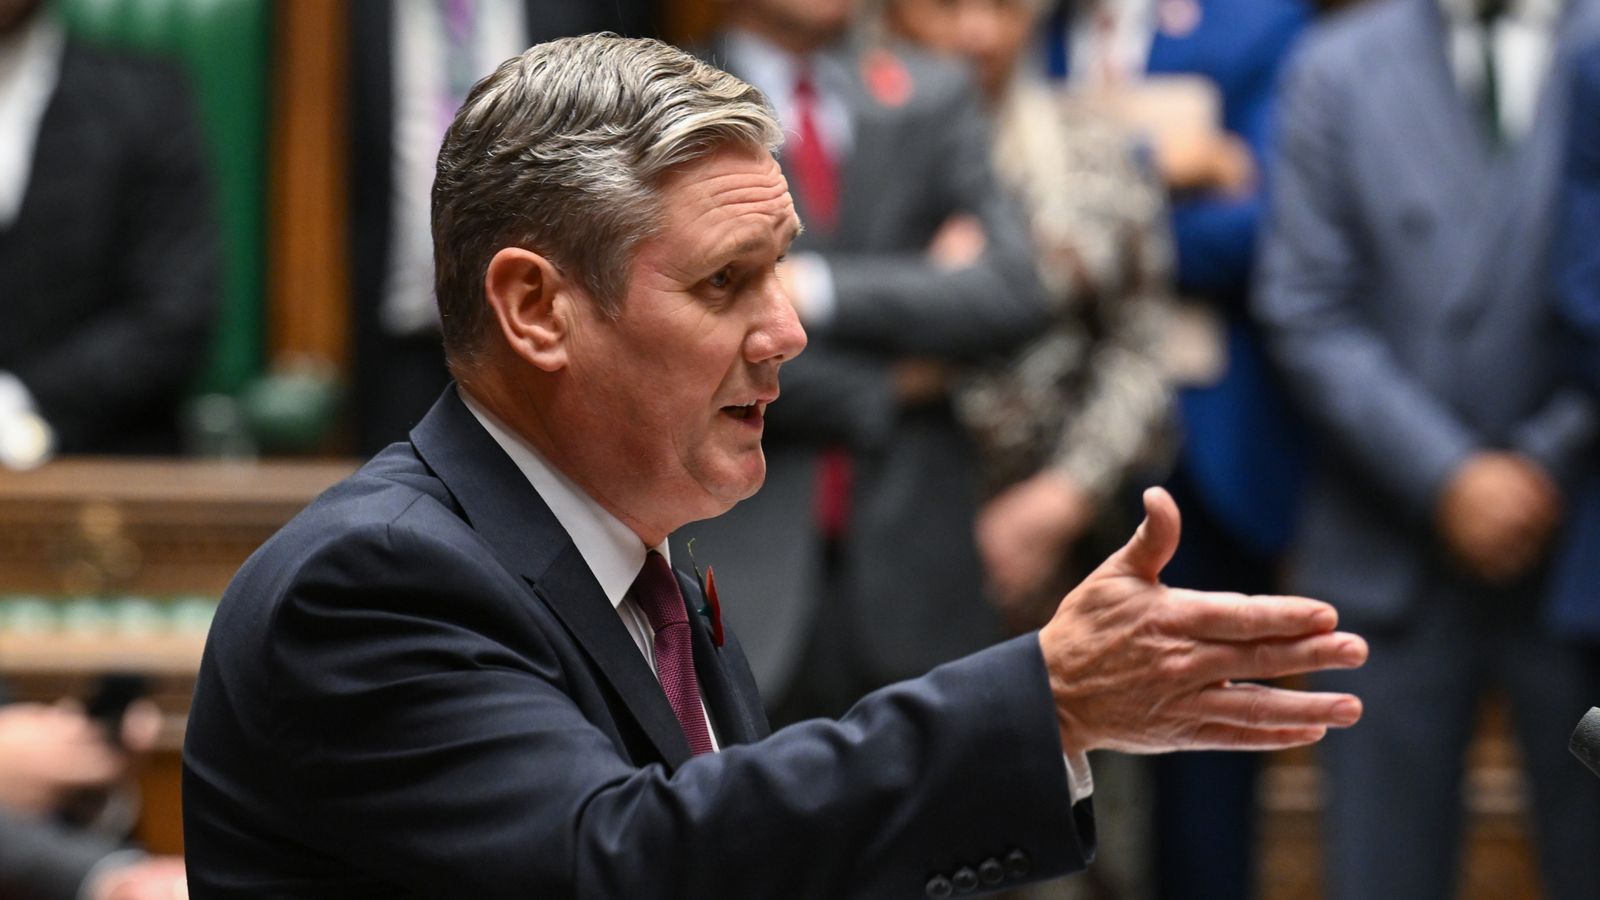 Sir Keir Starmer considers putting Labour Israel-Hamas amendment to Commons amid worries over party unity